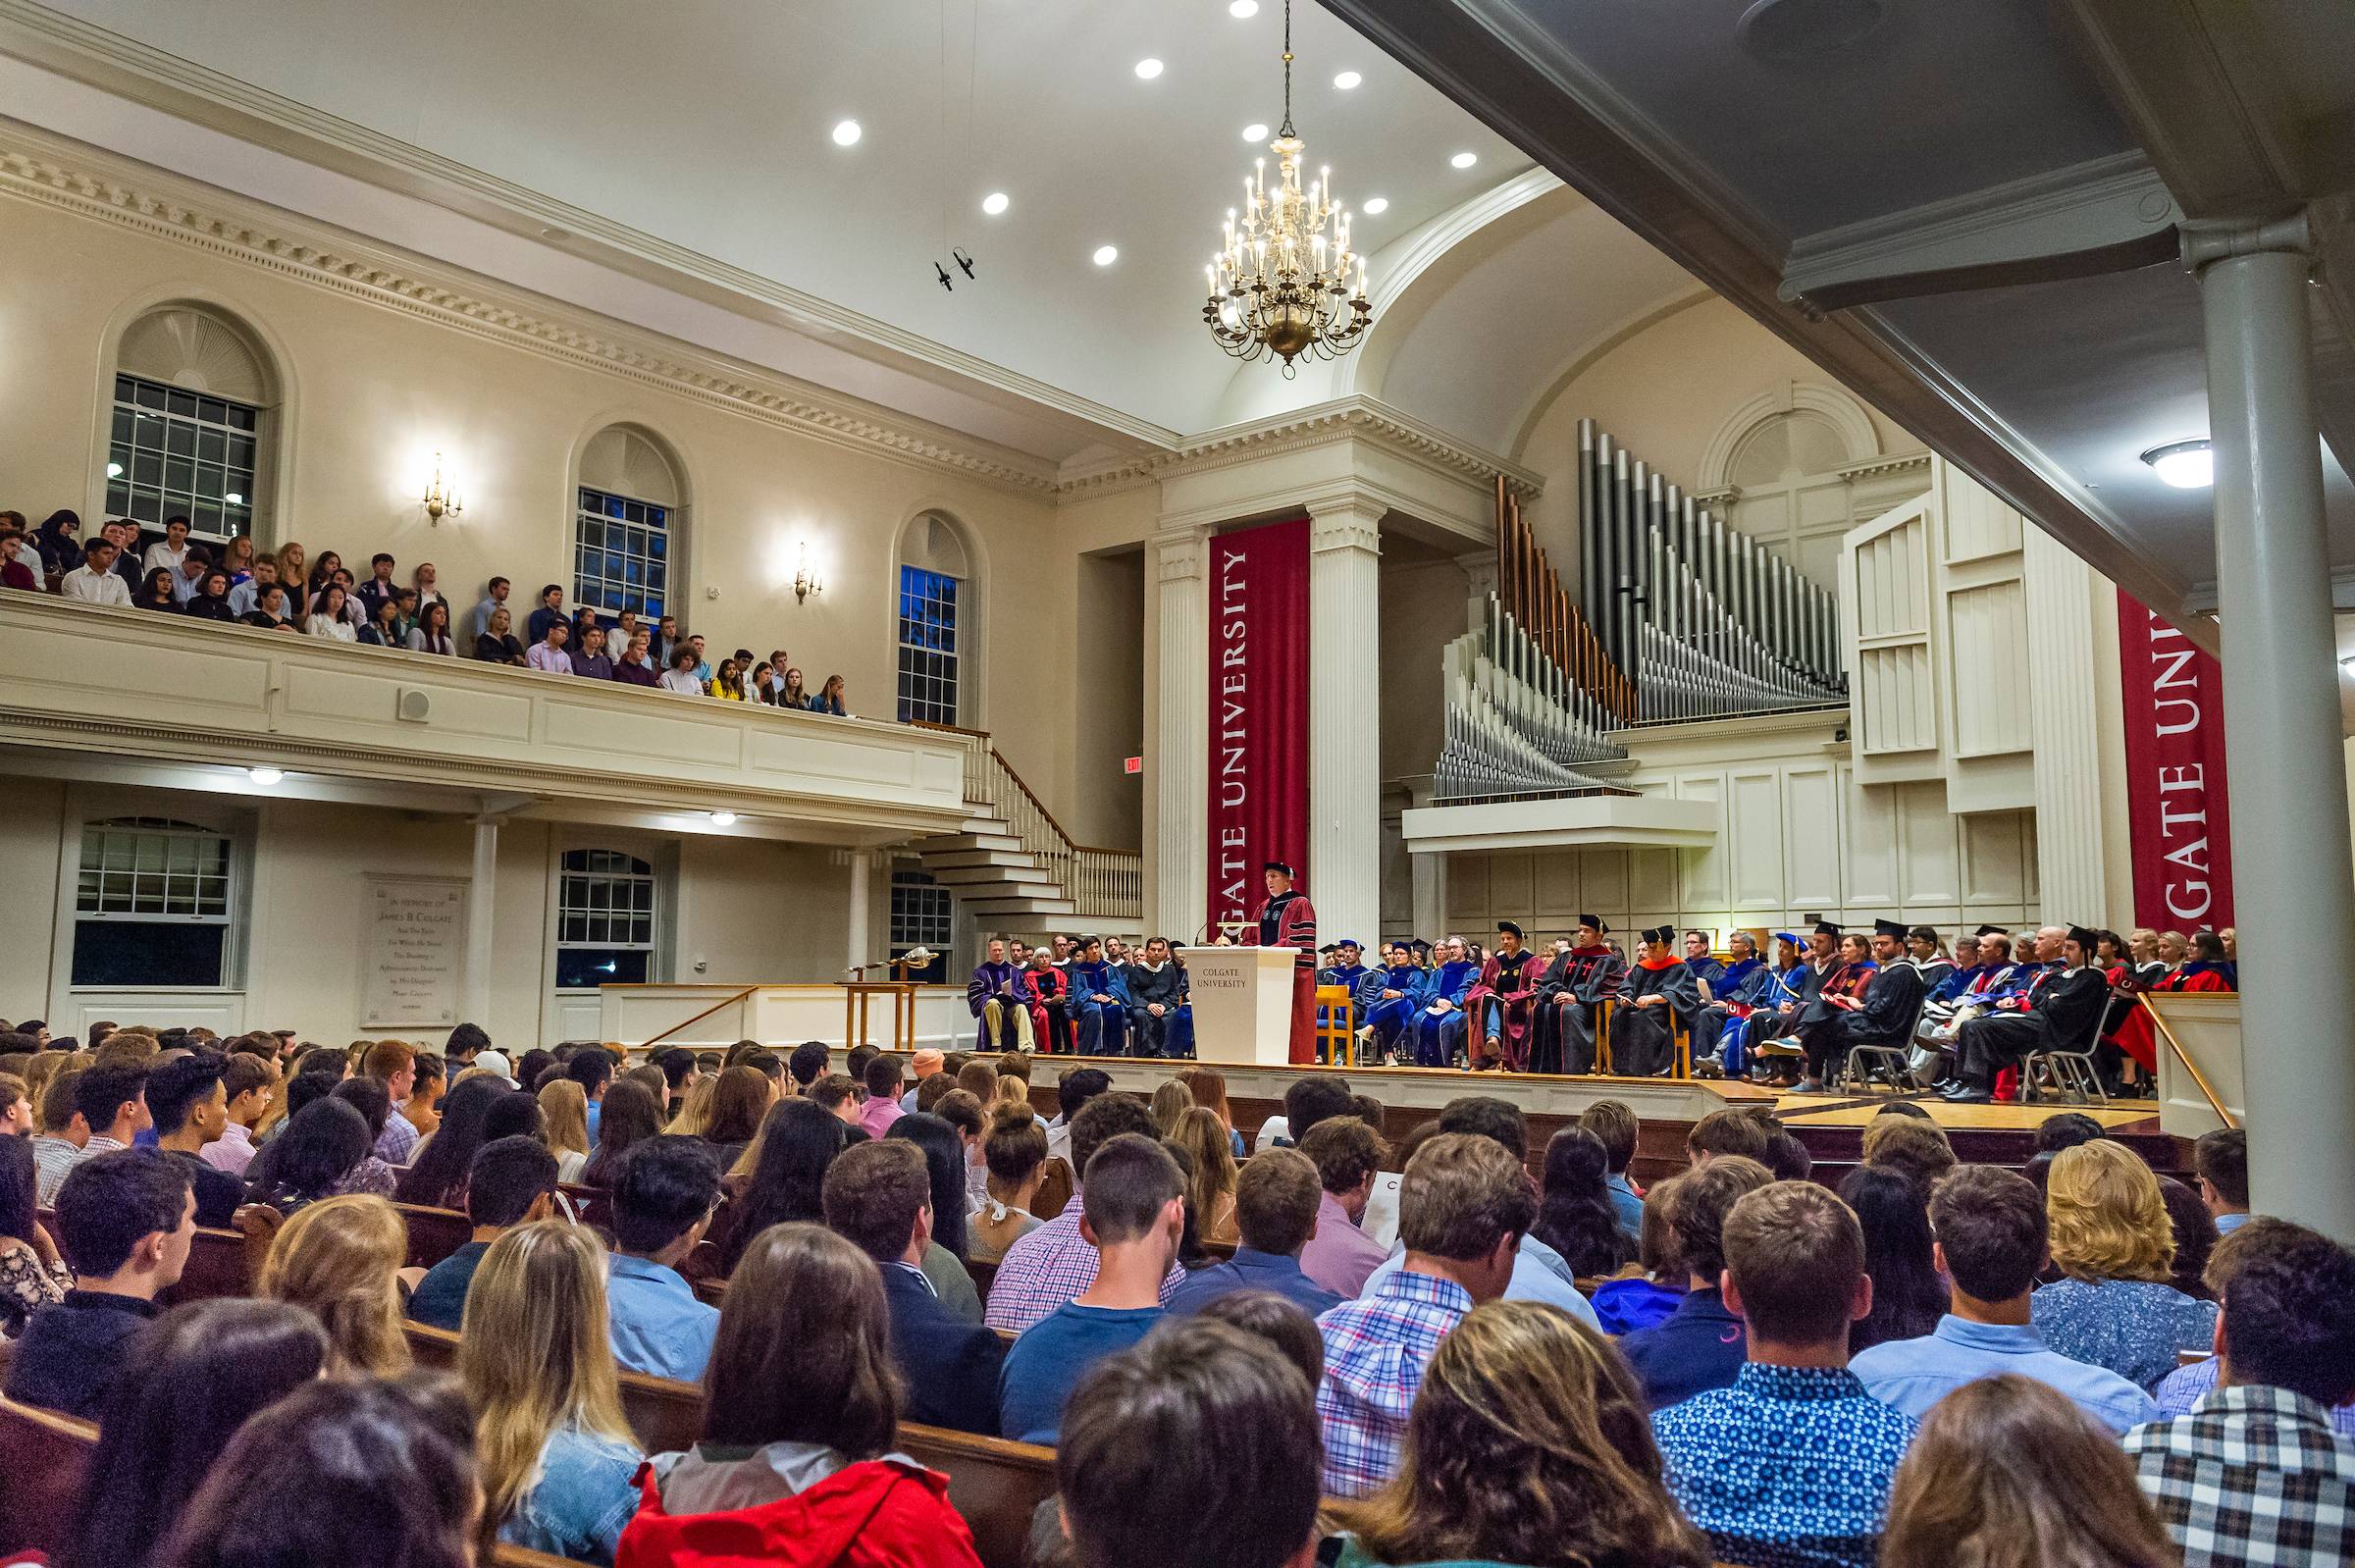 Students in the Class of 2023 gathered in the Colgate Memorial Chapel for Convocation Wednesday, August 28, 2019.